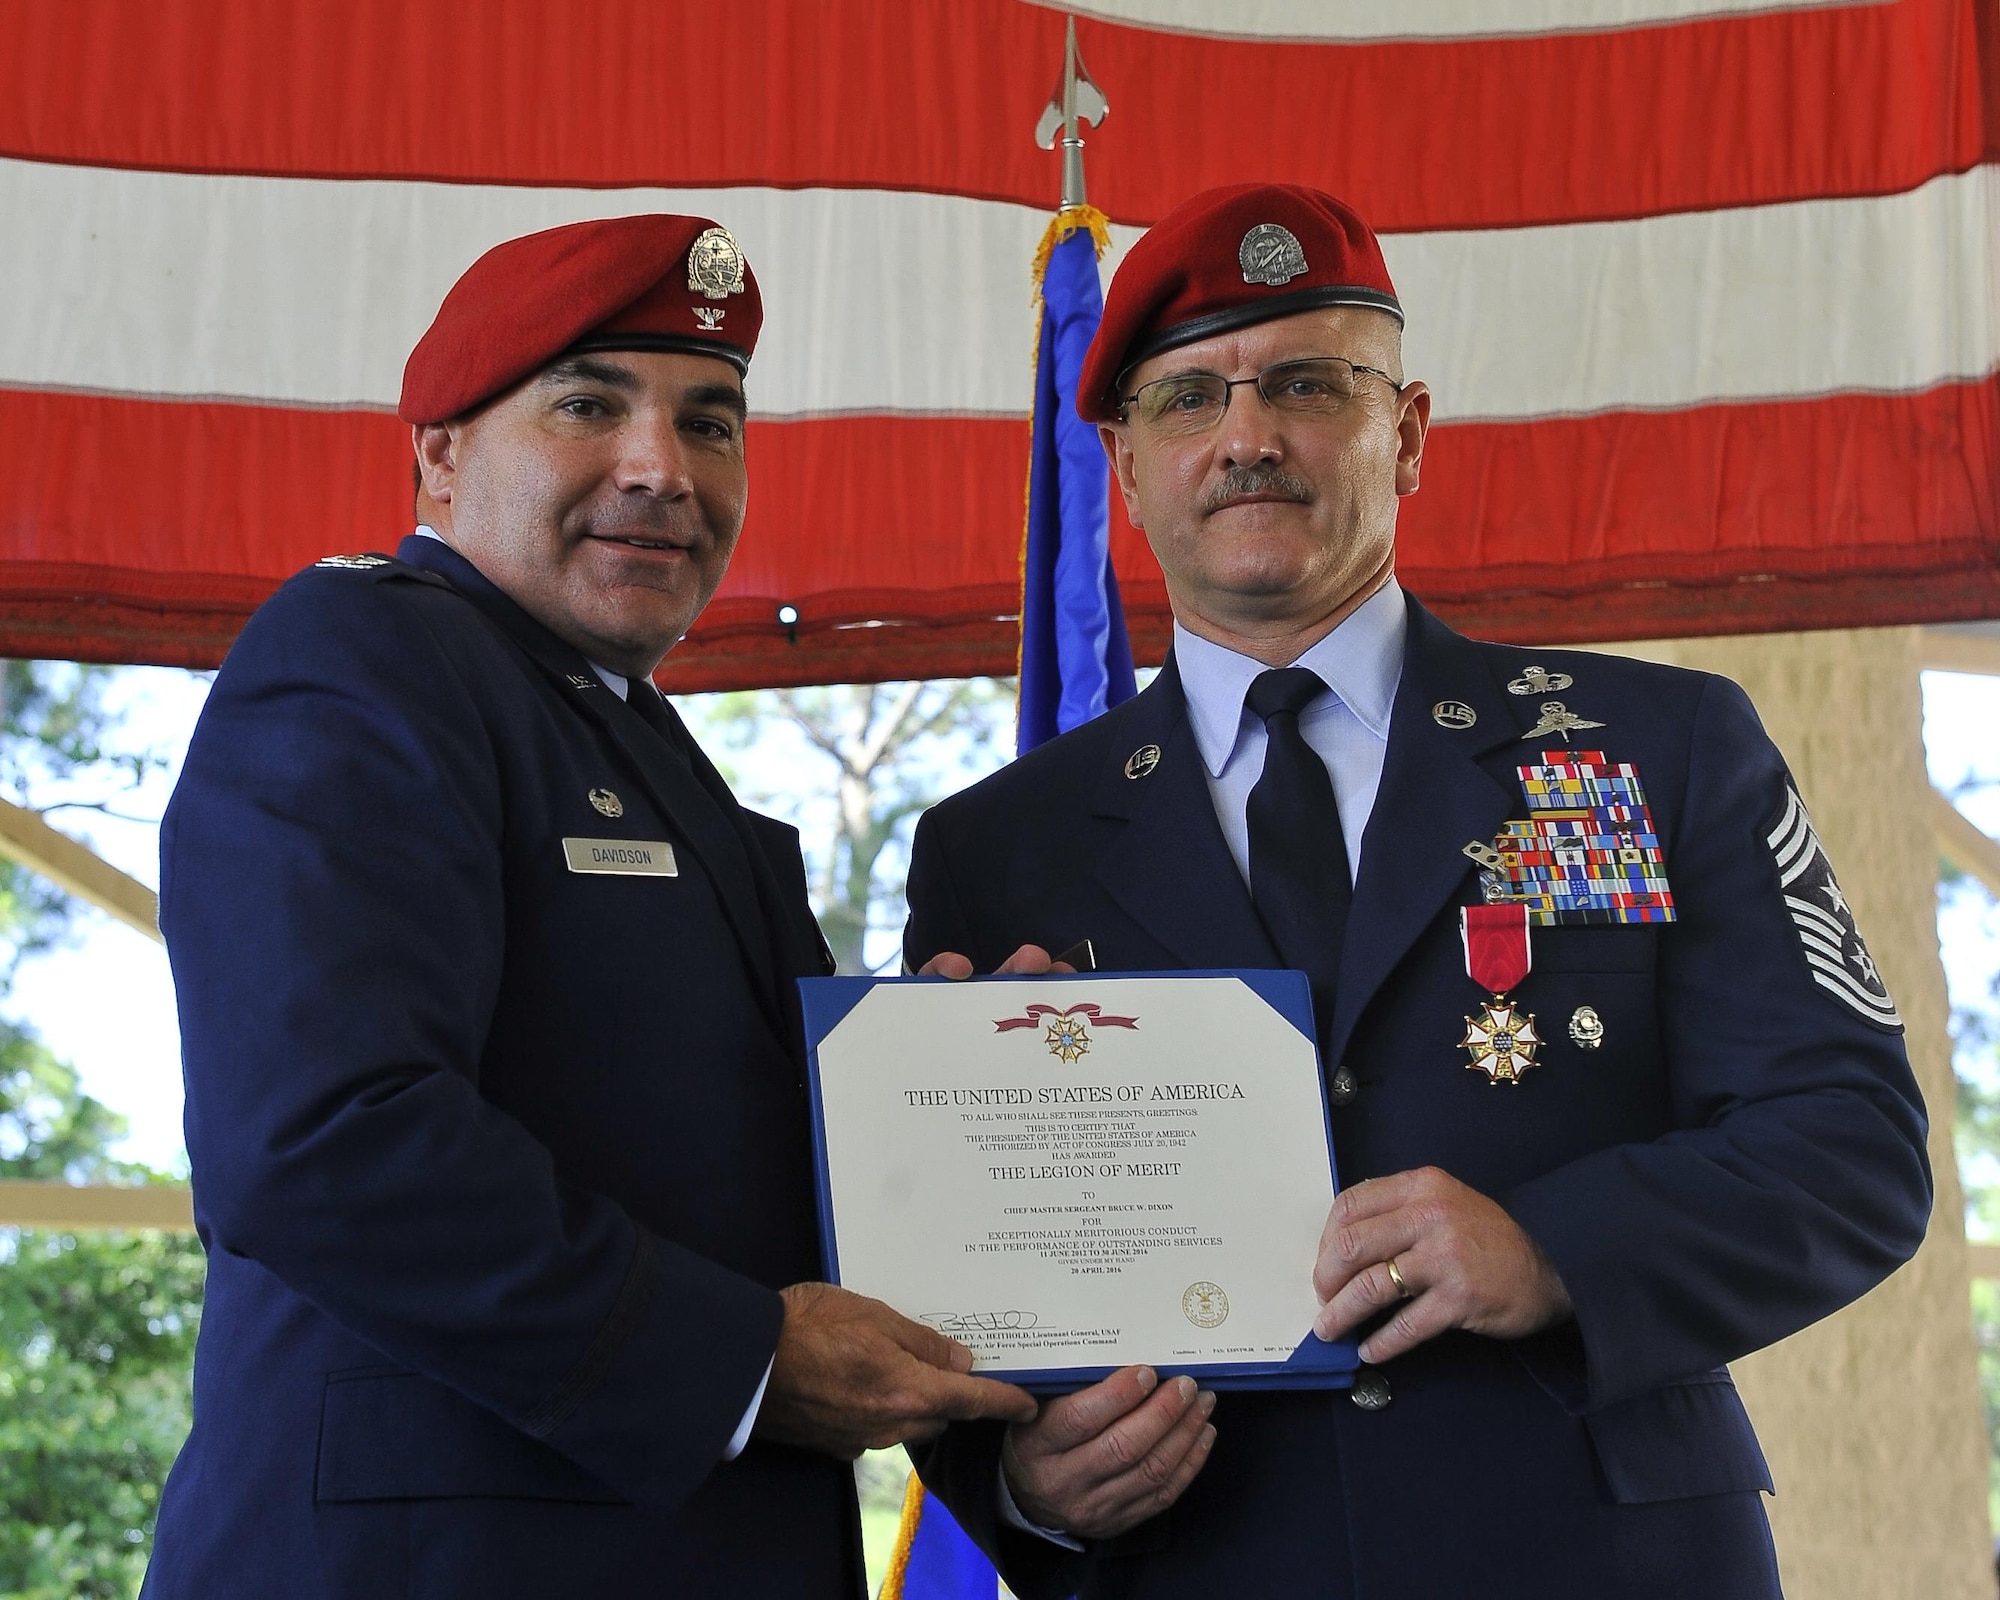 Col. Matthew Davidson, the commander of the 24th Special Operations Wing, presents Chief Master Sgt. Bruce Dixon, the command chief master sergeant of the 24th SOW, a Legion of Merit Medal certificate during Dixon's retirement ceremony at Hurlburt Field, Fla., May 13, 2016. Dixon served 30 years as a combat controller, earning the title of master parachutist with more than 400 military jumps including three combat jumps in Afghanistan. In total, he spent ten of those thirty years away from his family, consistently serving his nation's call in dangerous ground combat and training. (U.S. Air Force photo by Airman 1st Class Kai White)